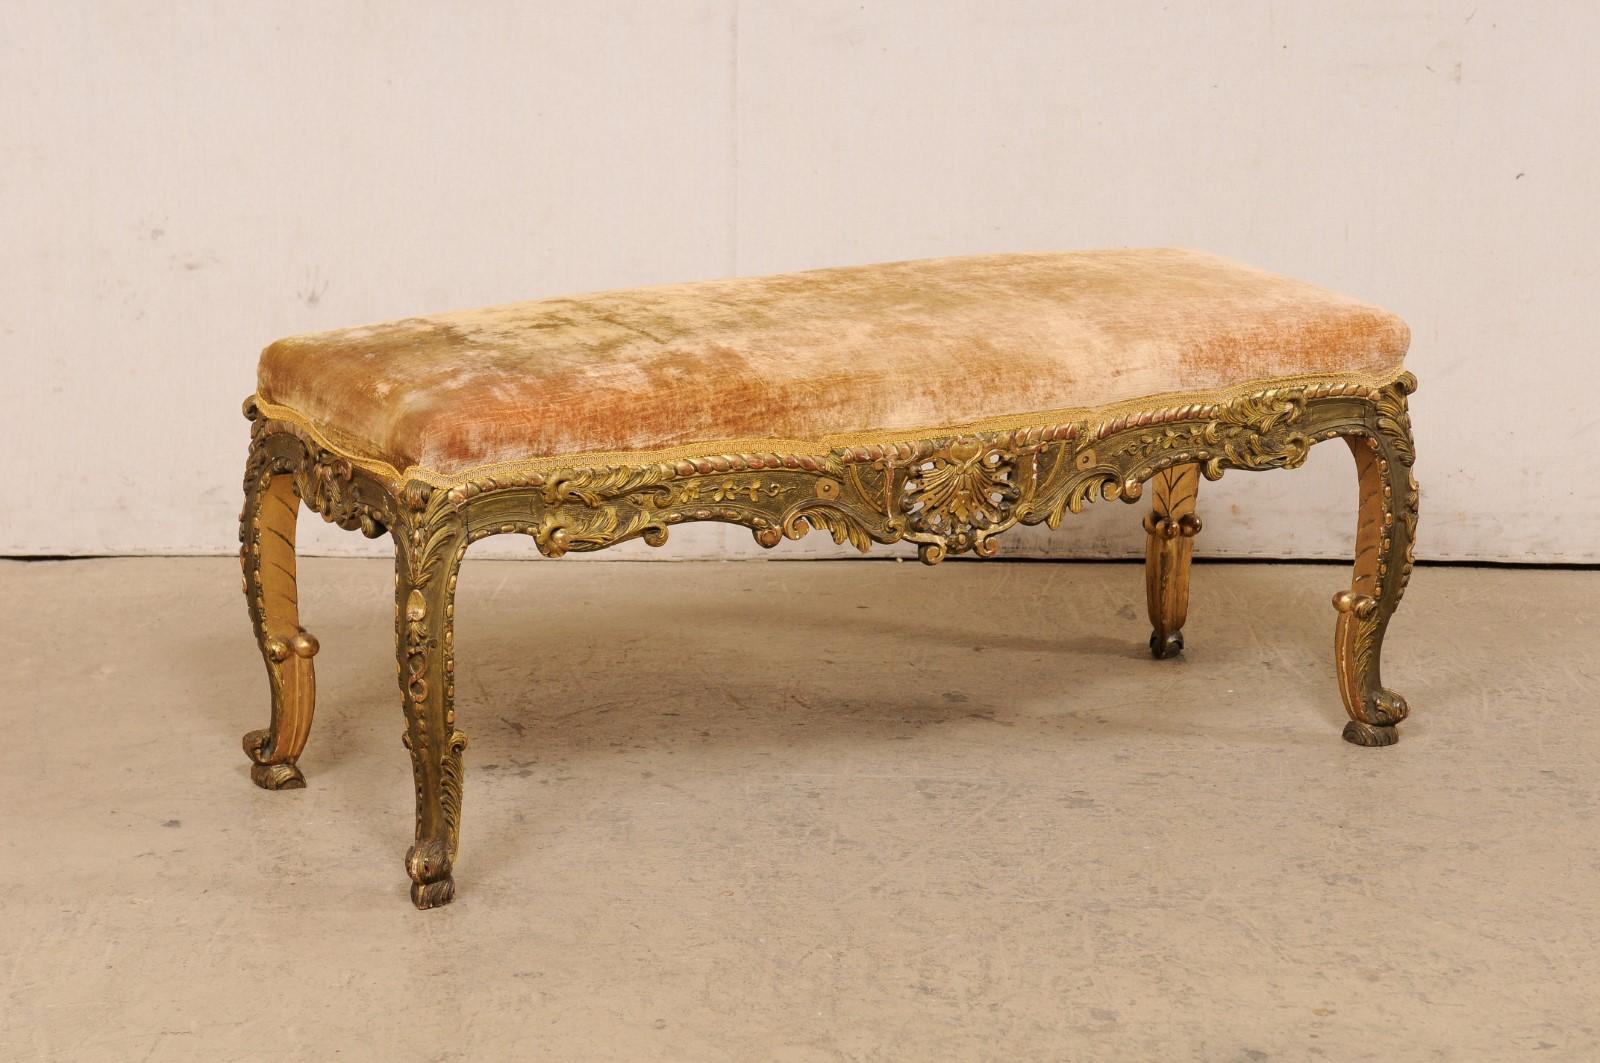 A French carved and gilt wood bench with upholstered seat from the late 19th century. This antique bench from France has a mostly rectangular-shape with curvy serpentine profiled sides. The upholstered seat is framed within an elaborately carved